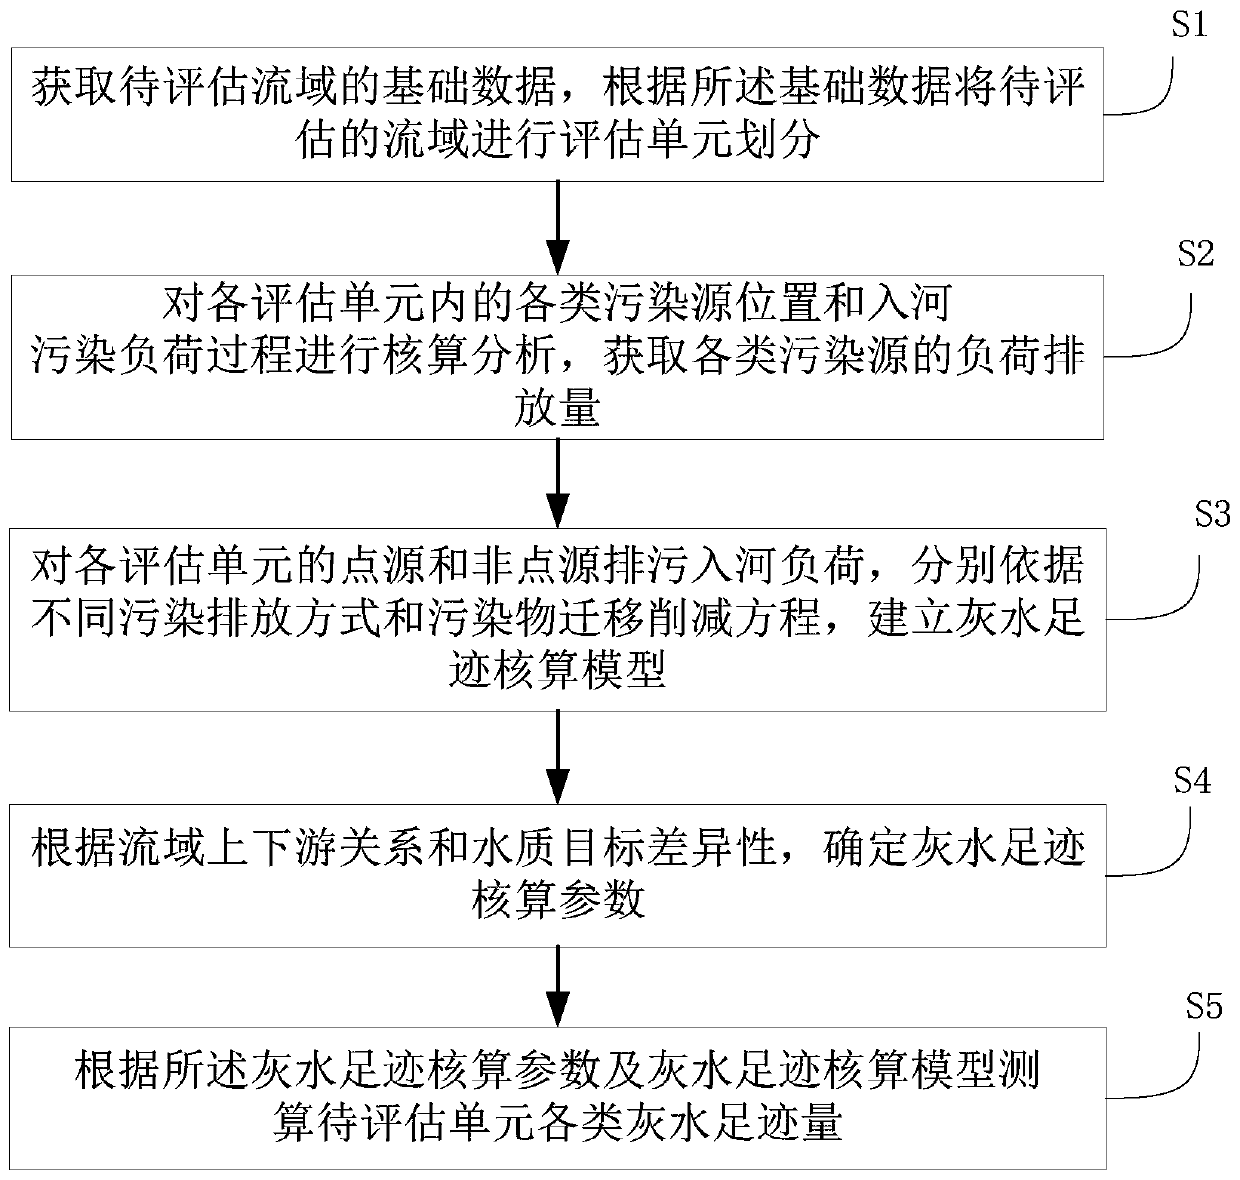 Basin grey water footprint evaluation method and water environment treatment strategy making method